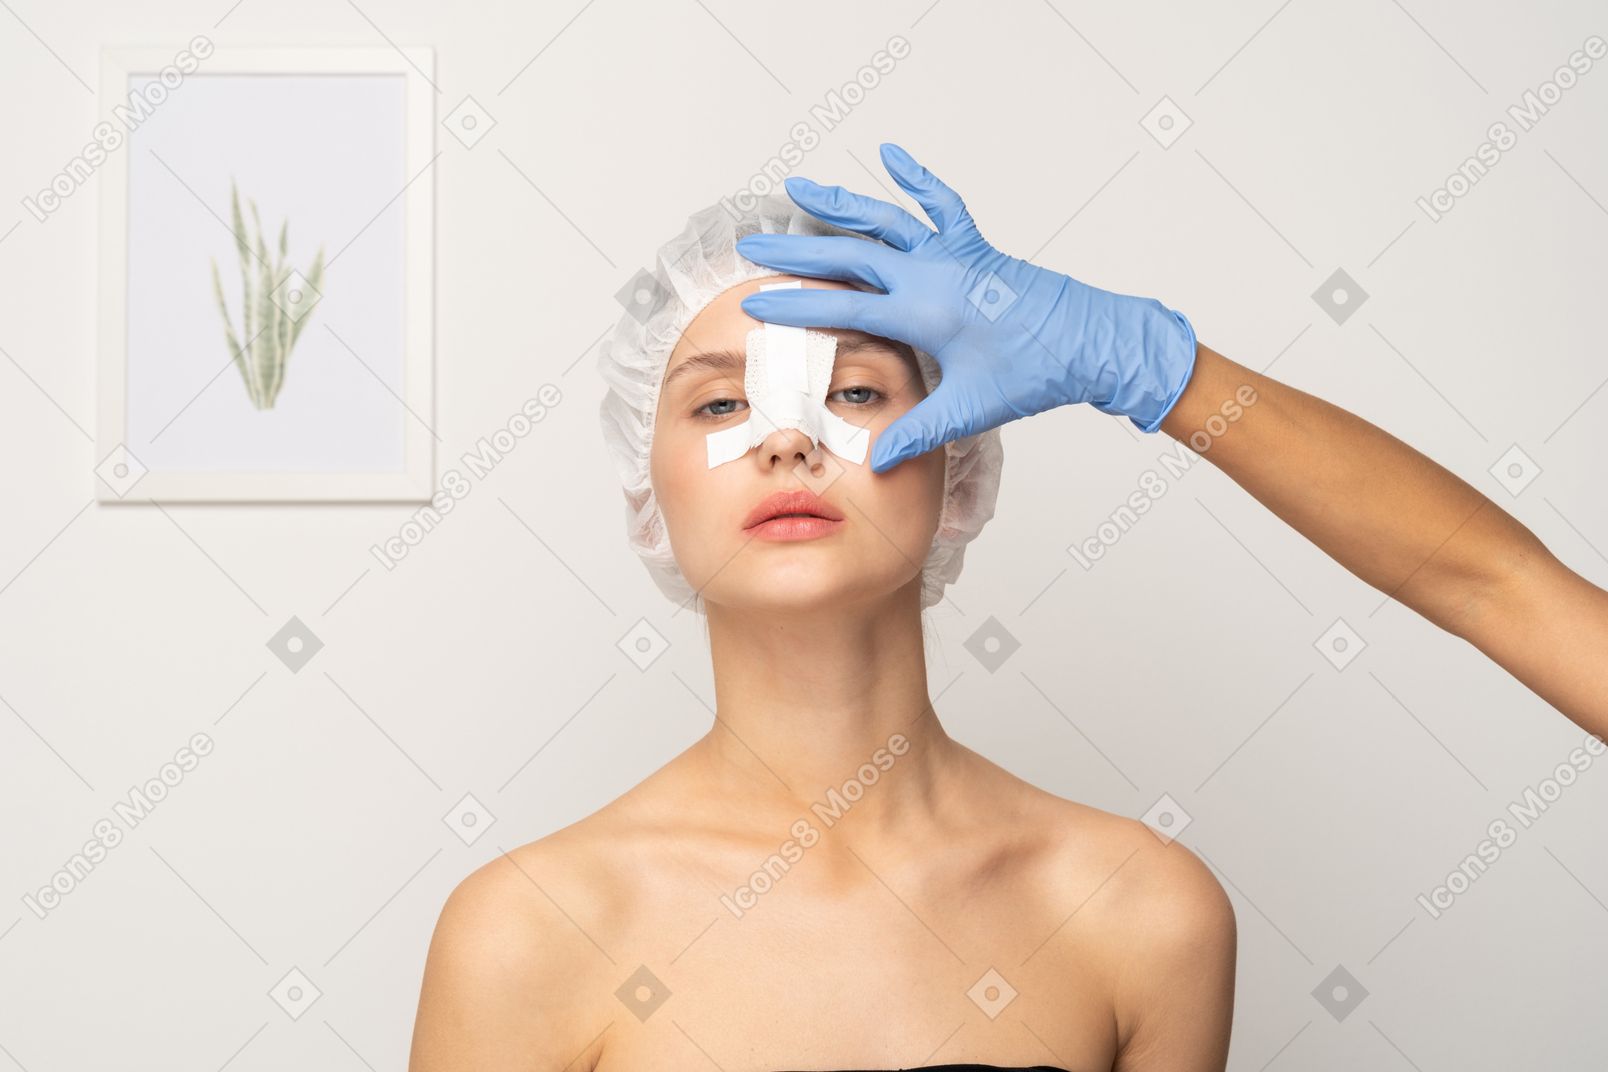 Nurse applying medical tape to young woman's nose